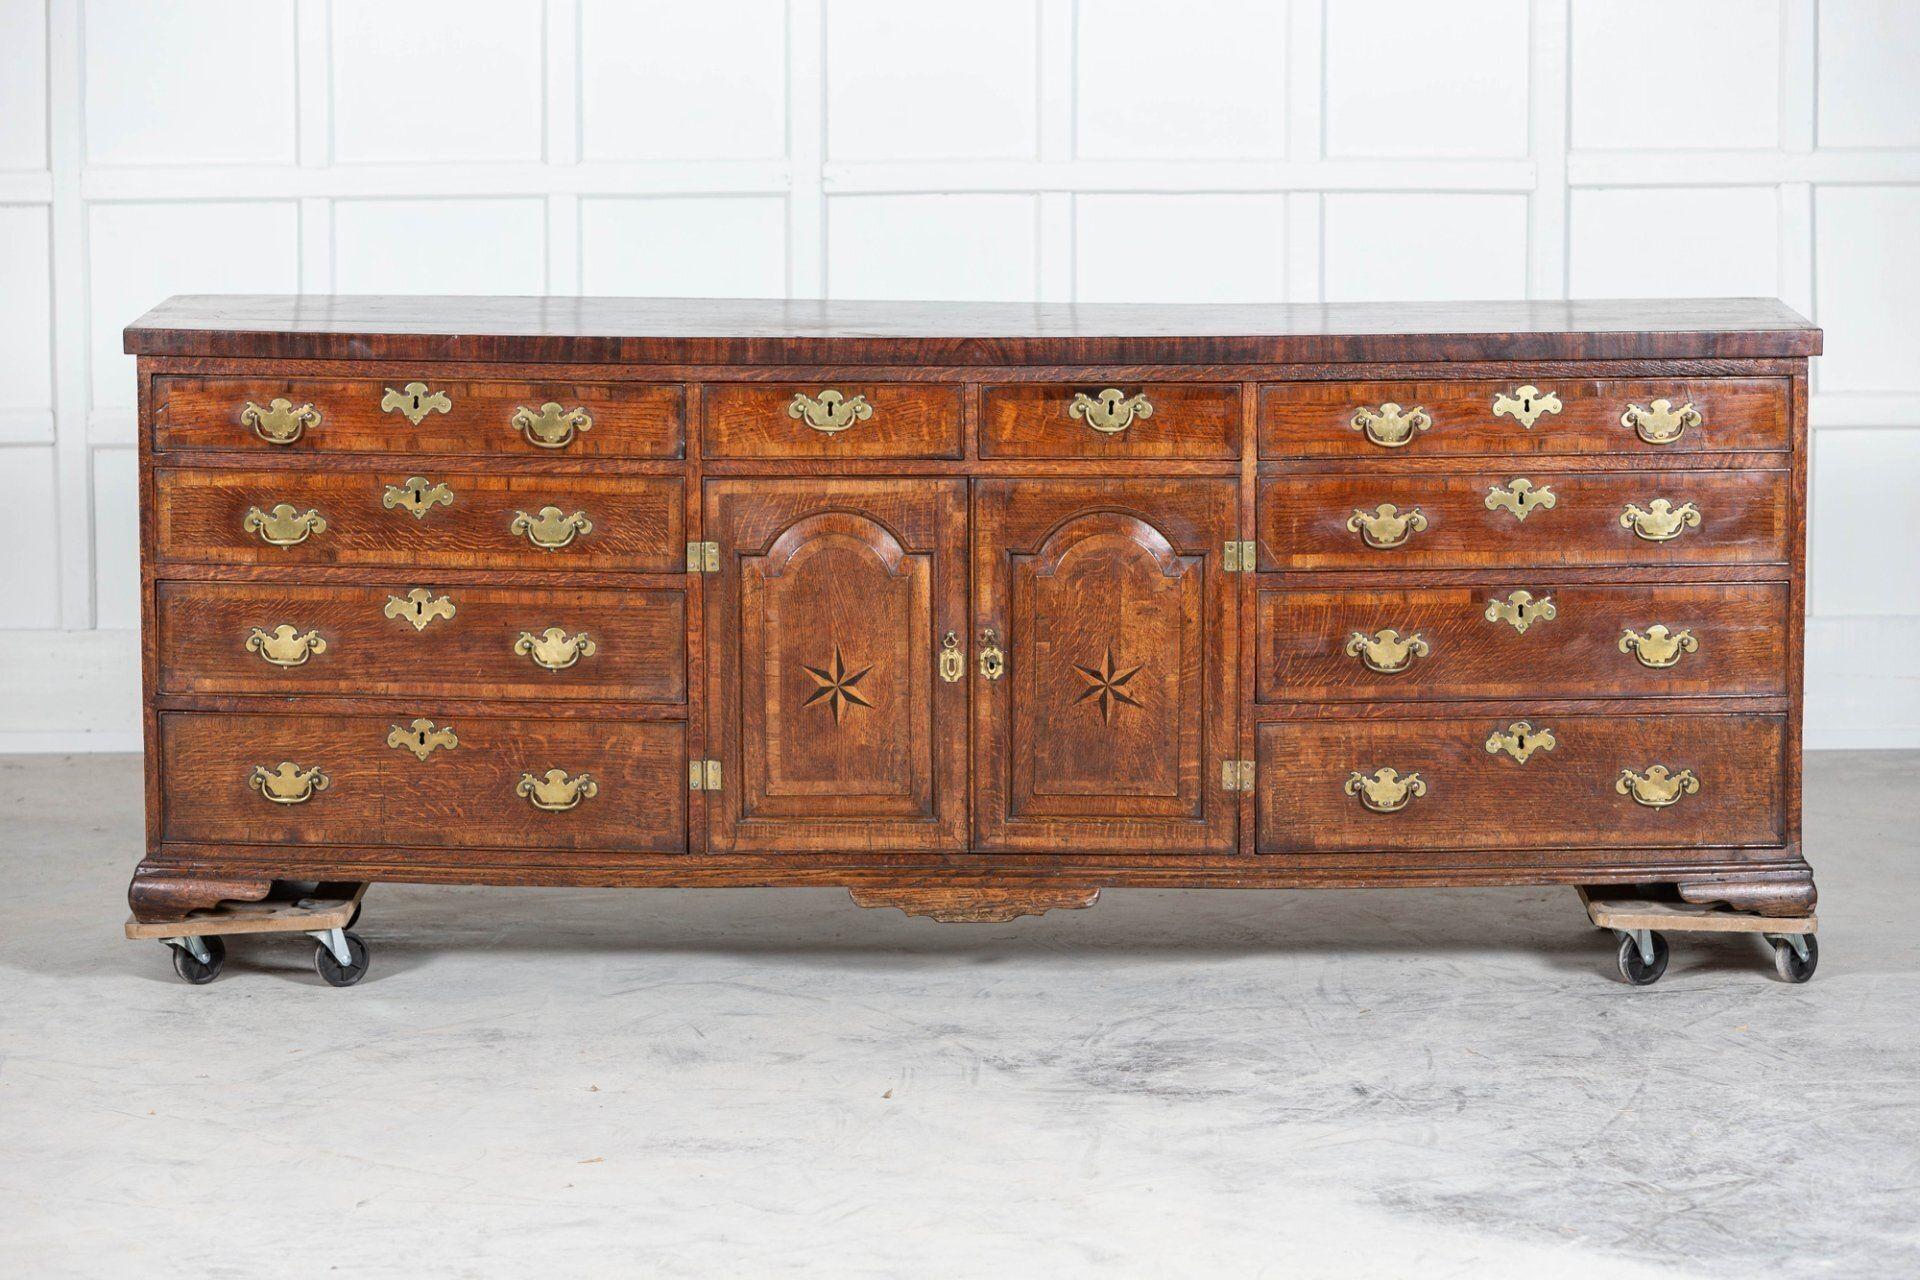 Circa 1720.
Large English 18thC George I oak dresser base with graduated drawers and fielded panel doors.
An exceptional example.
Lightly restored.
Measures: W 222 x D 52 x H 78cm.
 